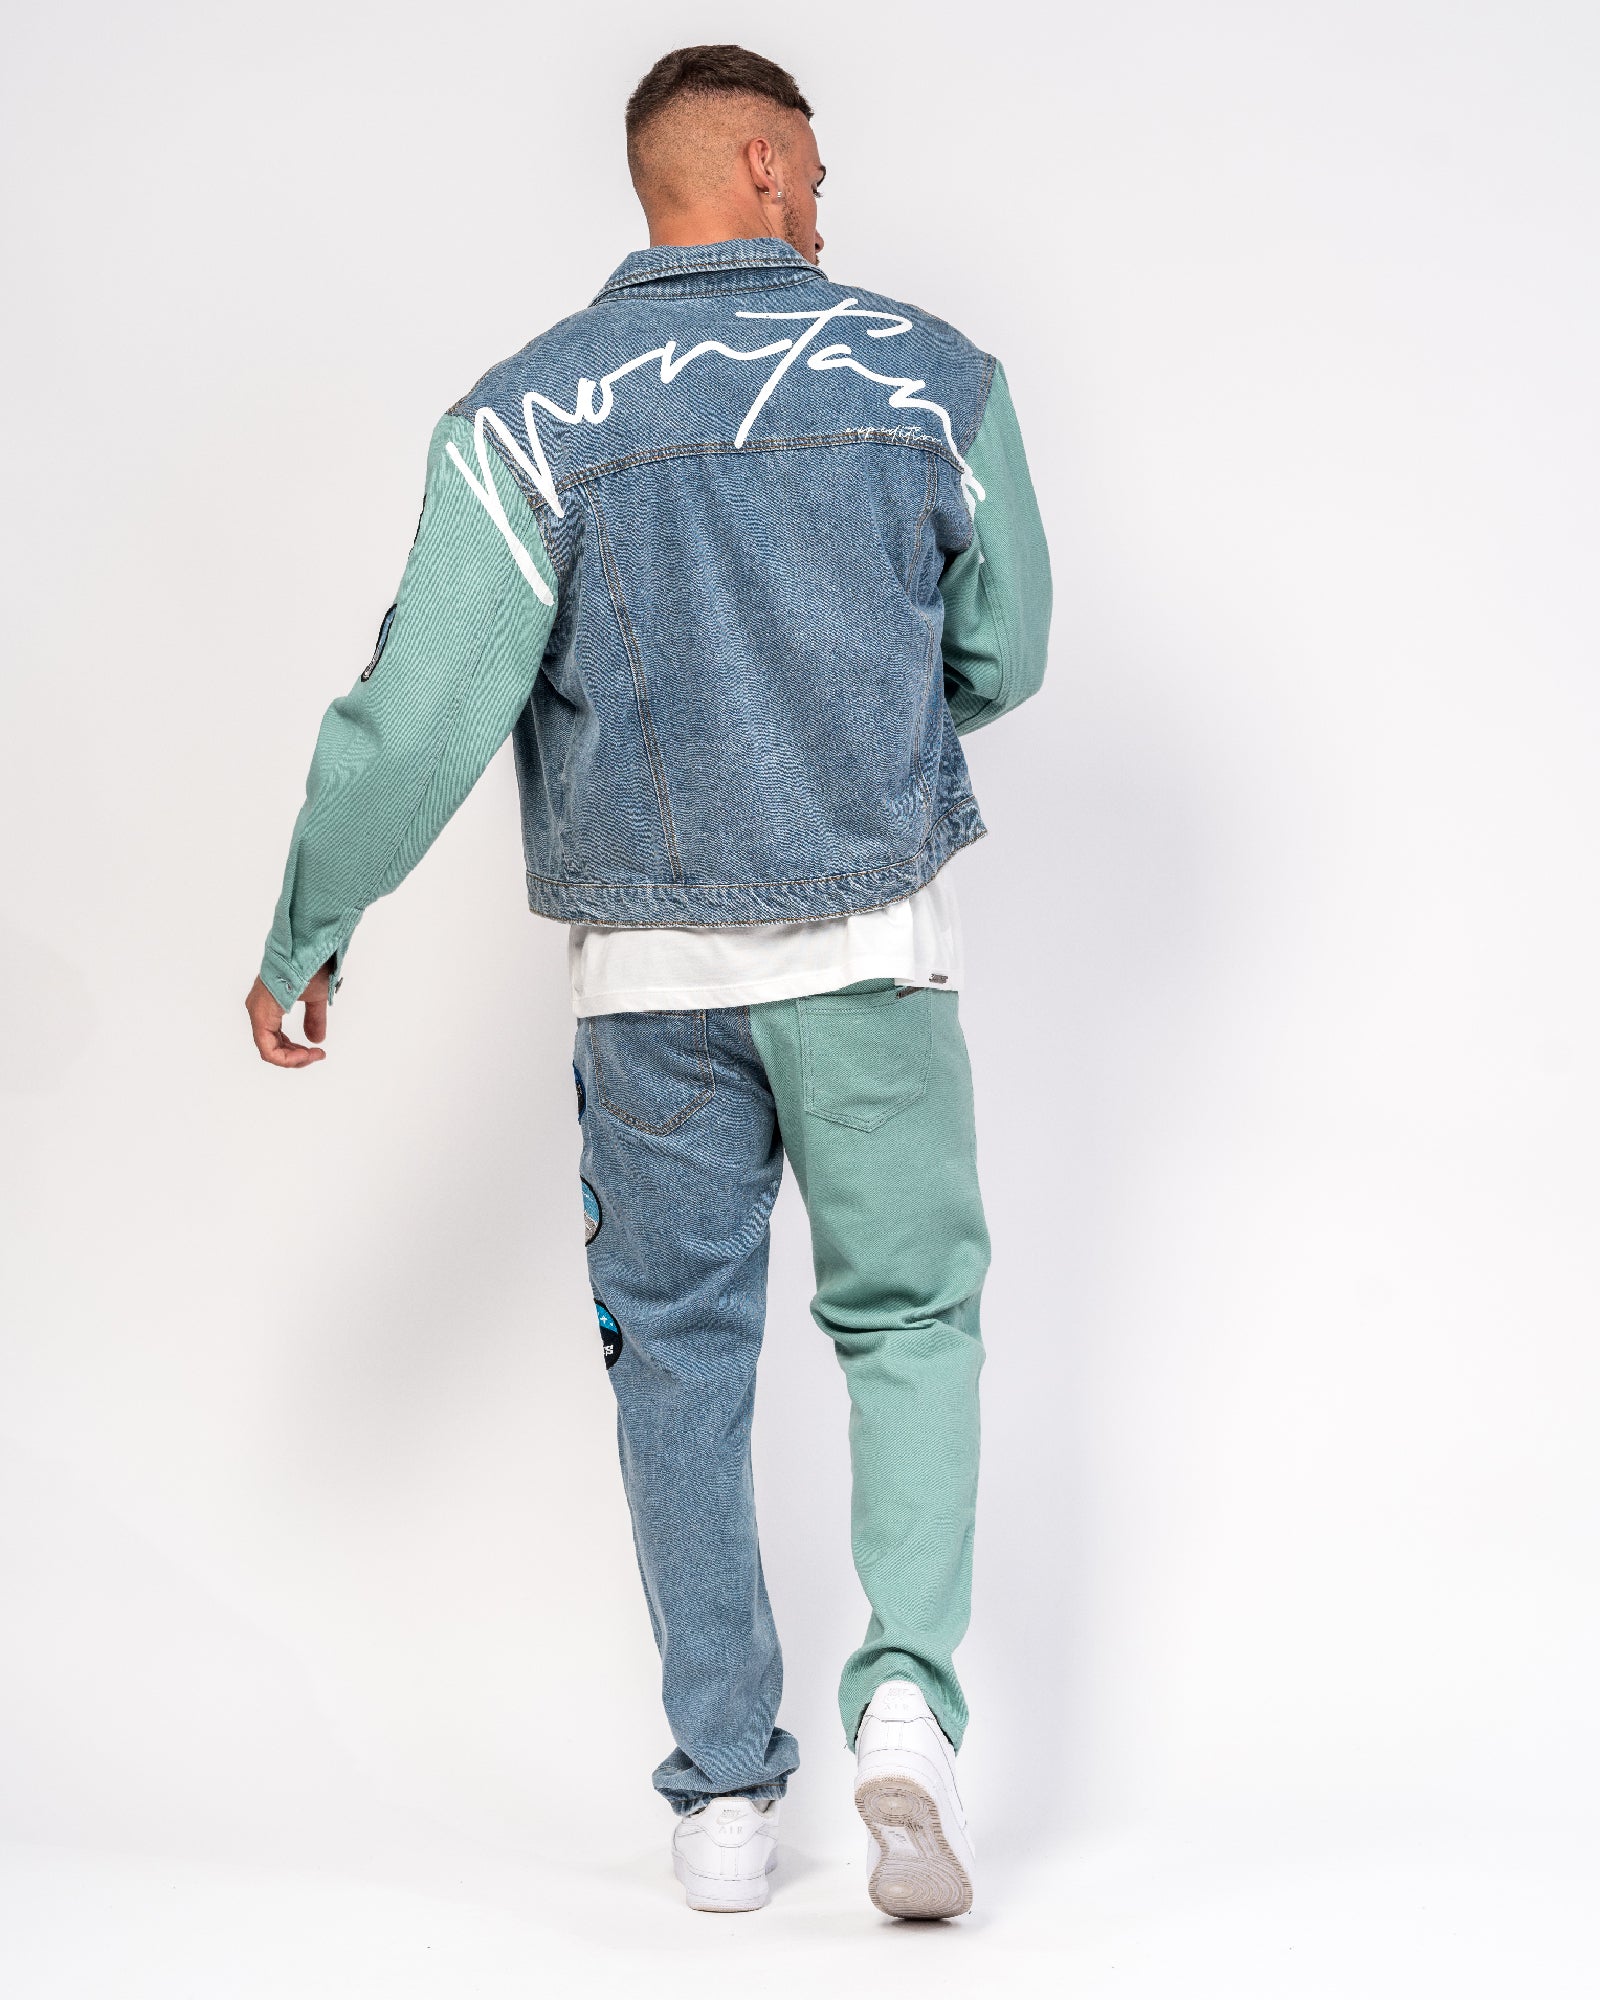 Montana Spliced Denim Jacket with Wilderness Embroidery Patches